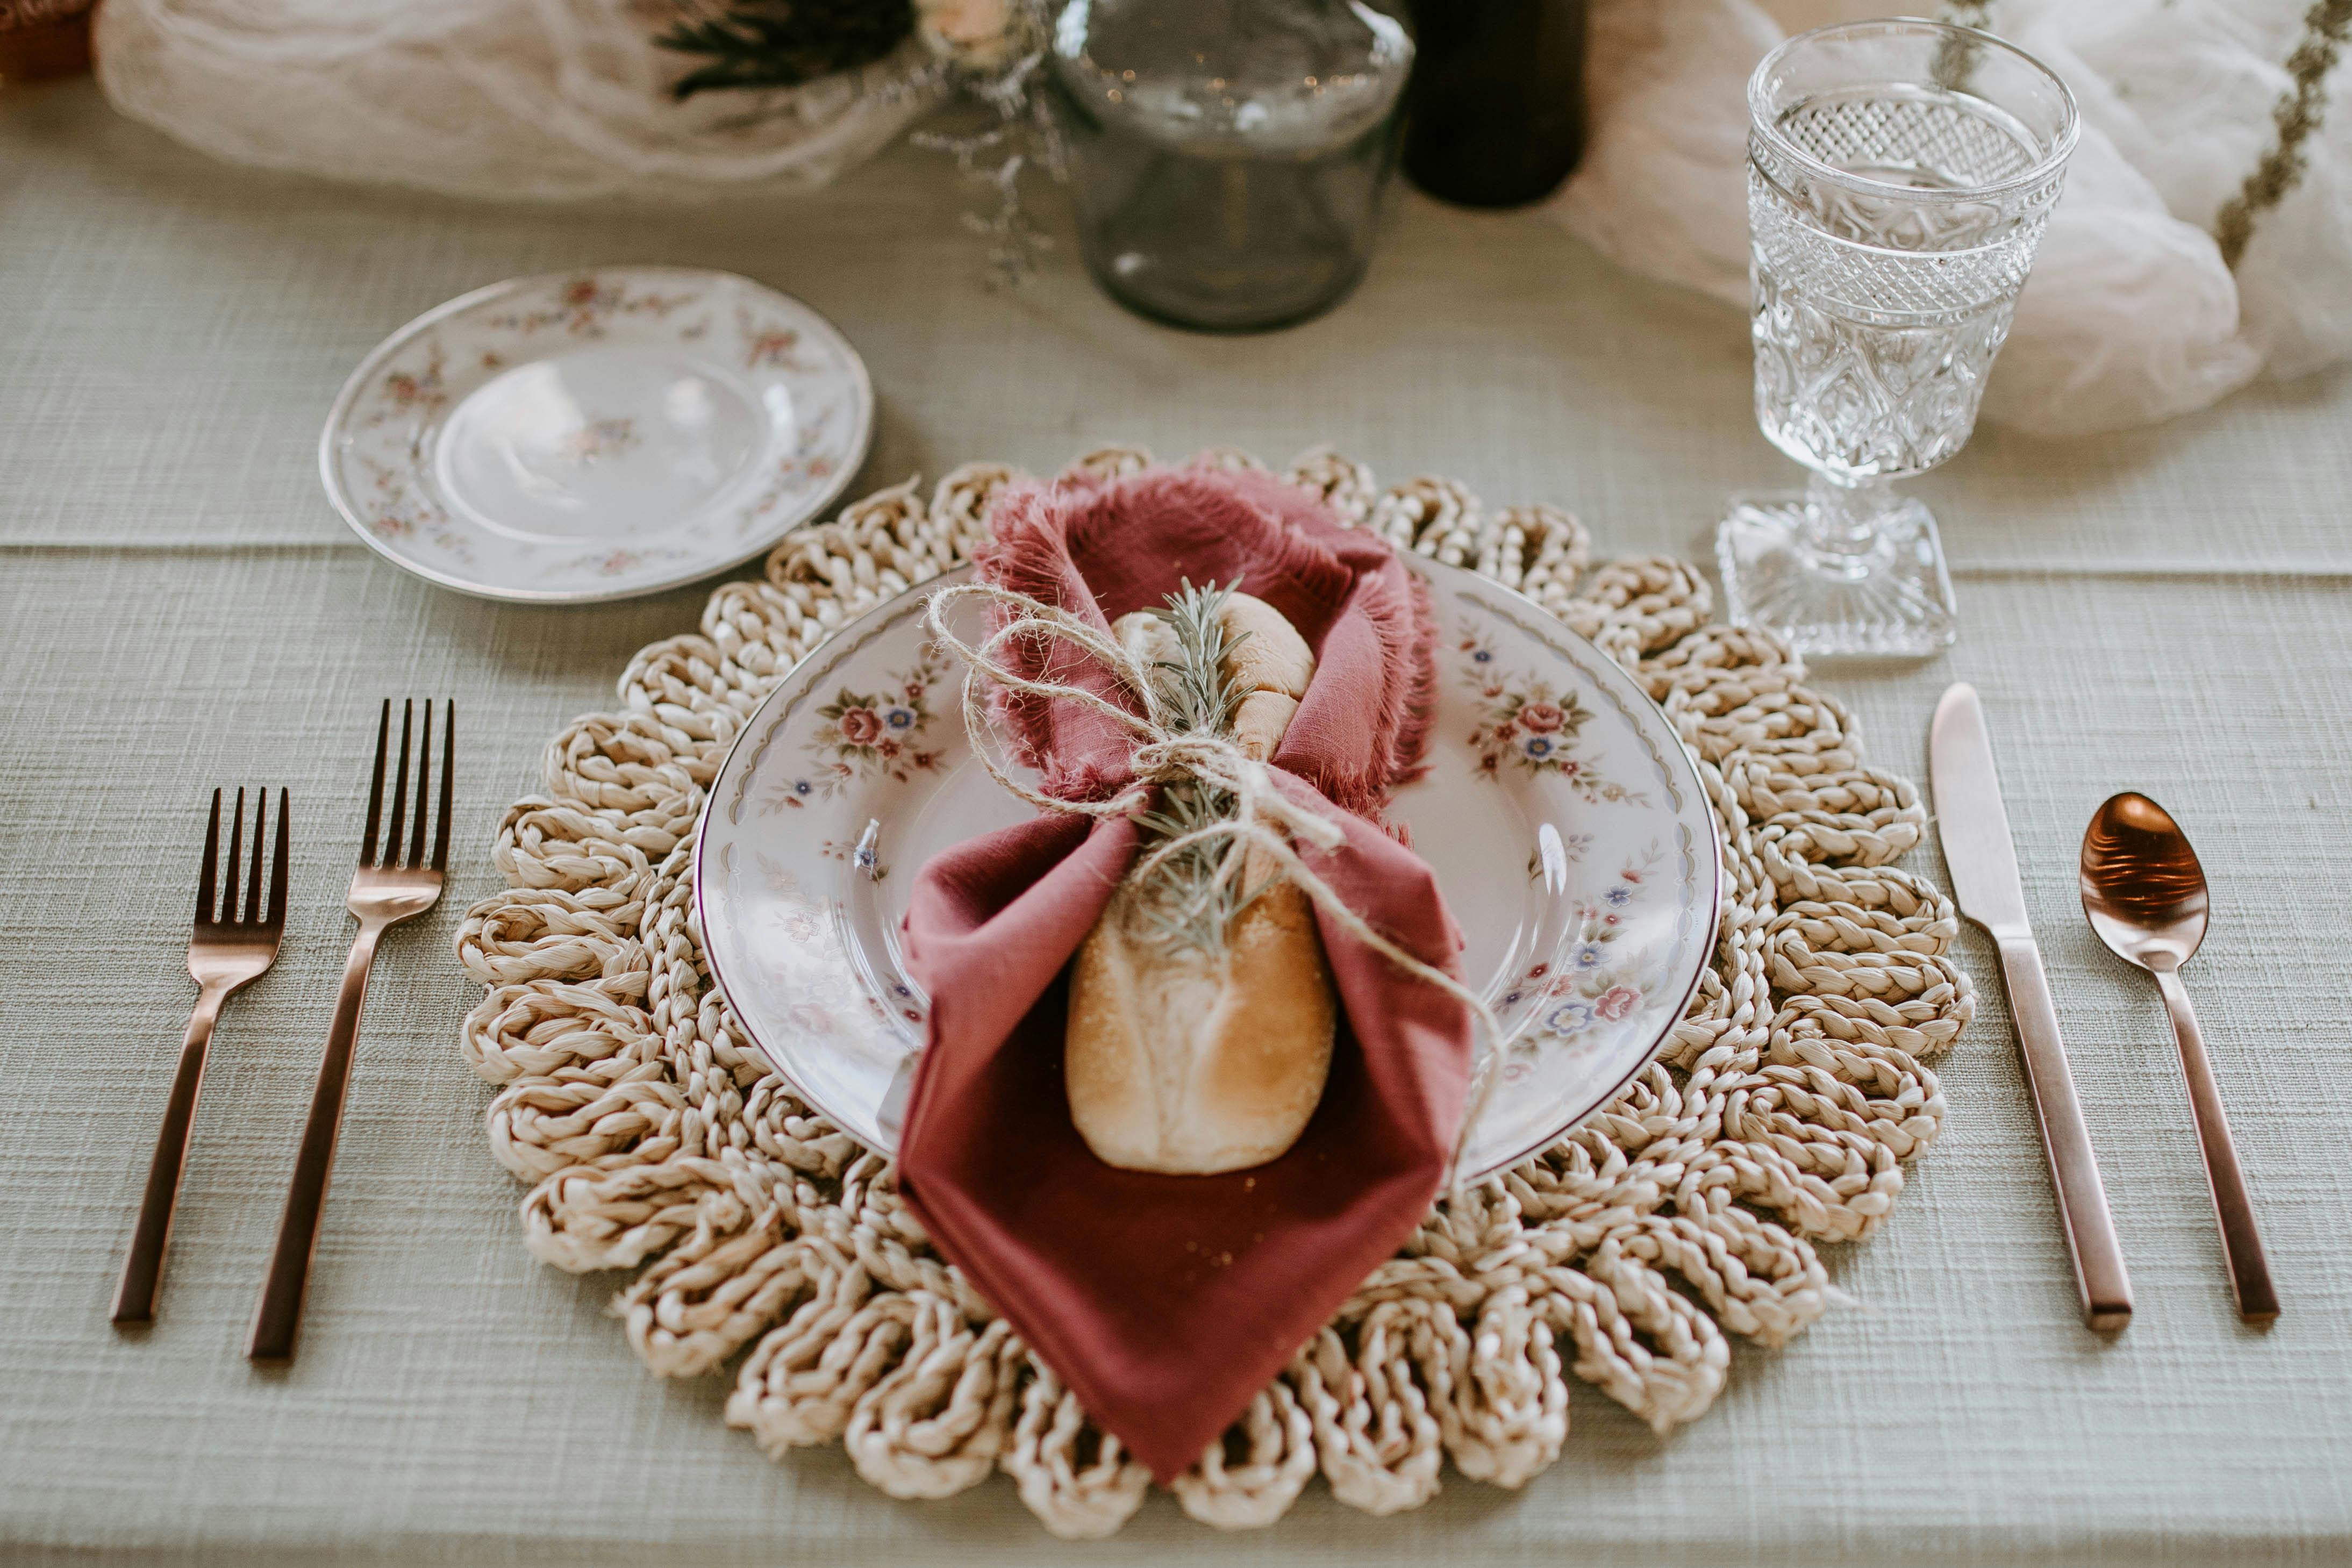 elegant plate with bread and napkin served on decorated table